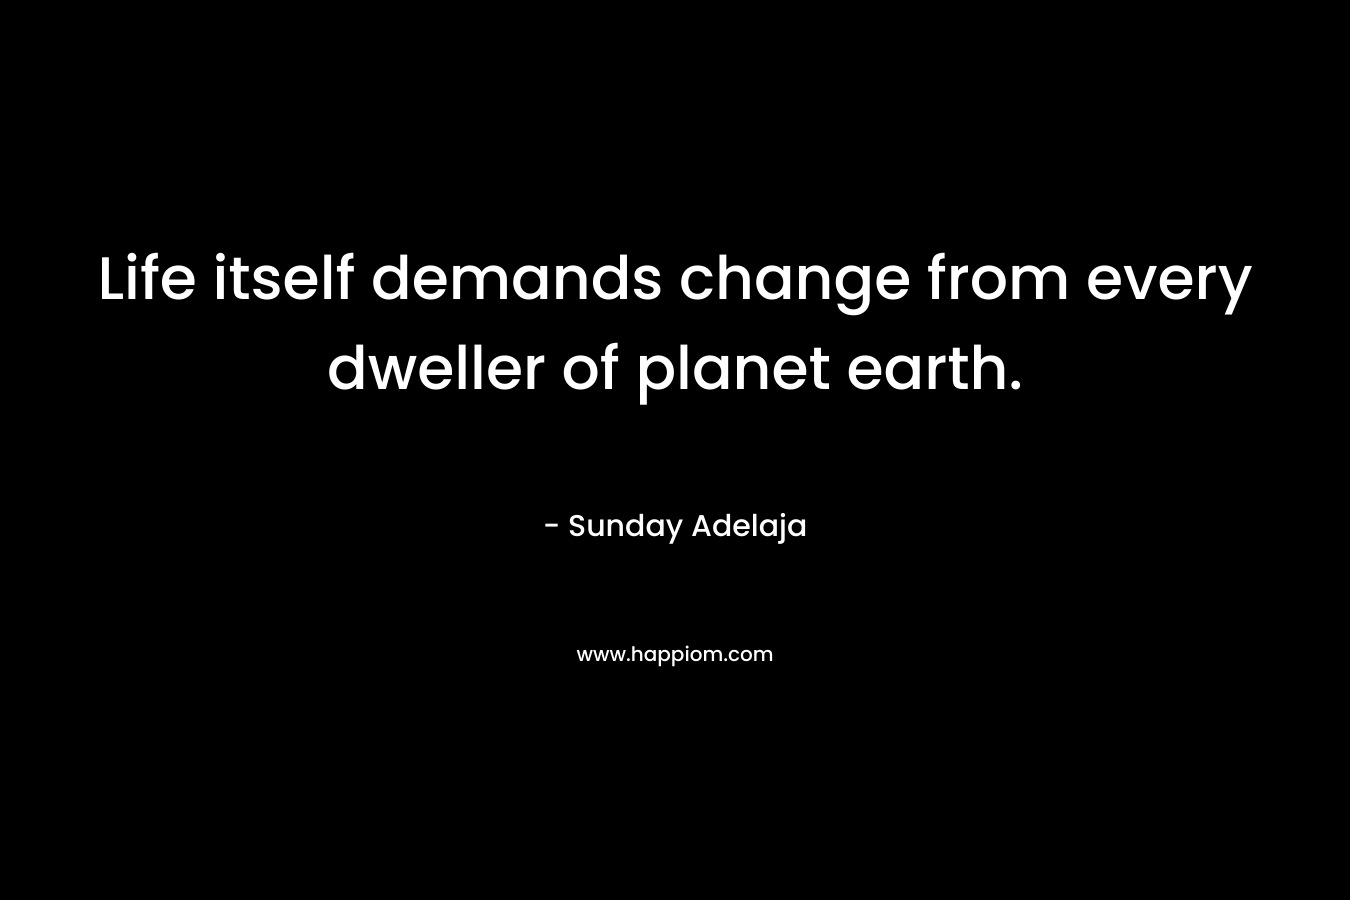 Life itself demands change from every dweller of planet earth.